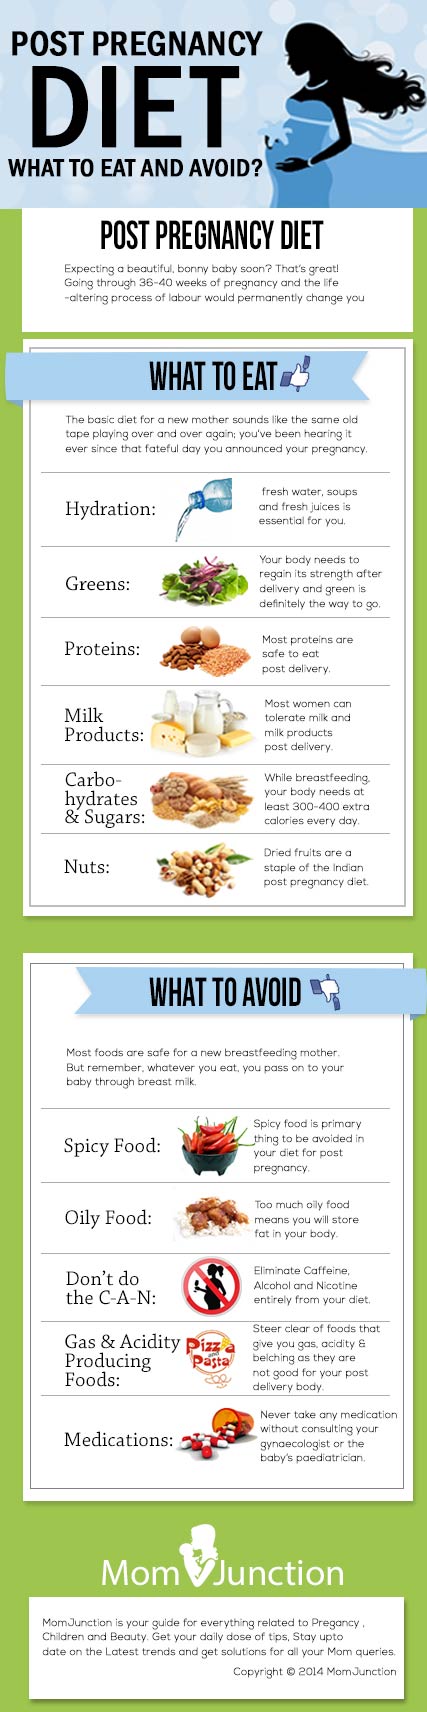 Breastfeeding Diet For A Colicky Baby